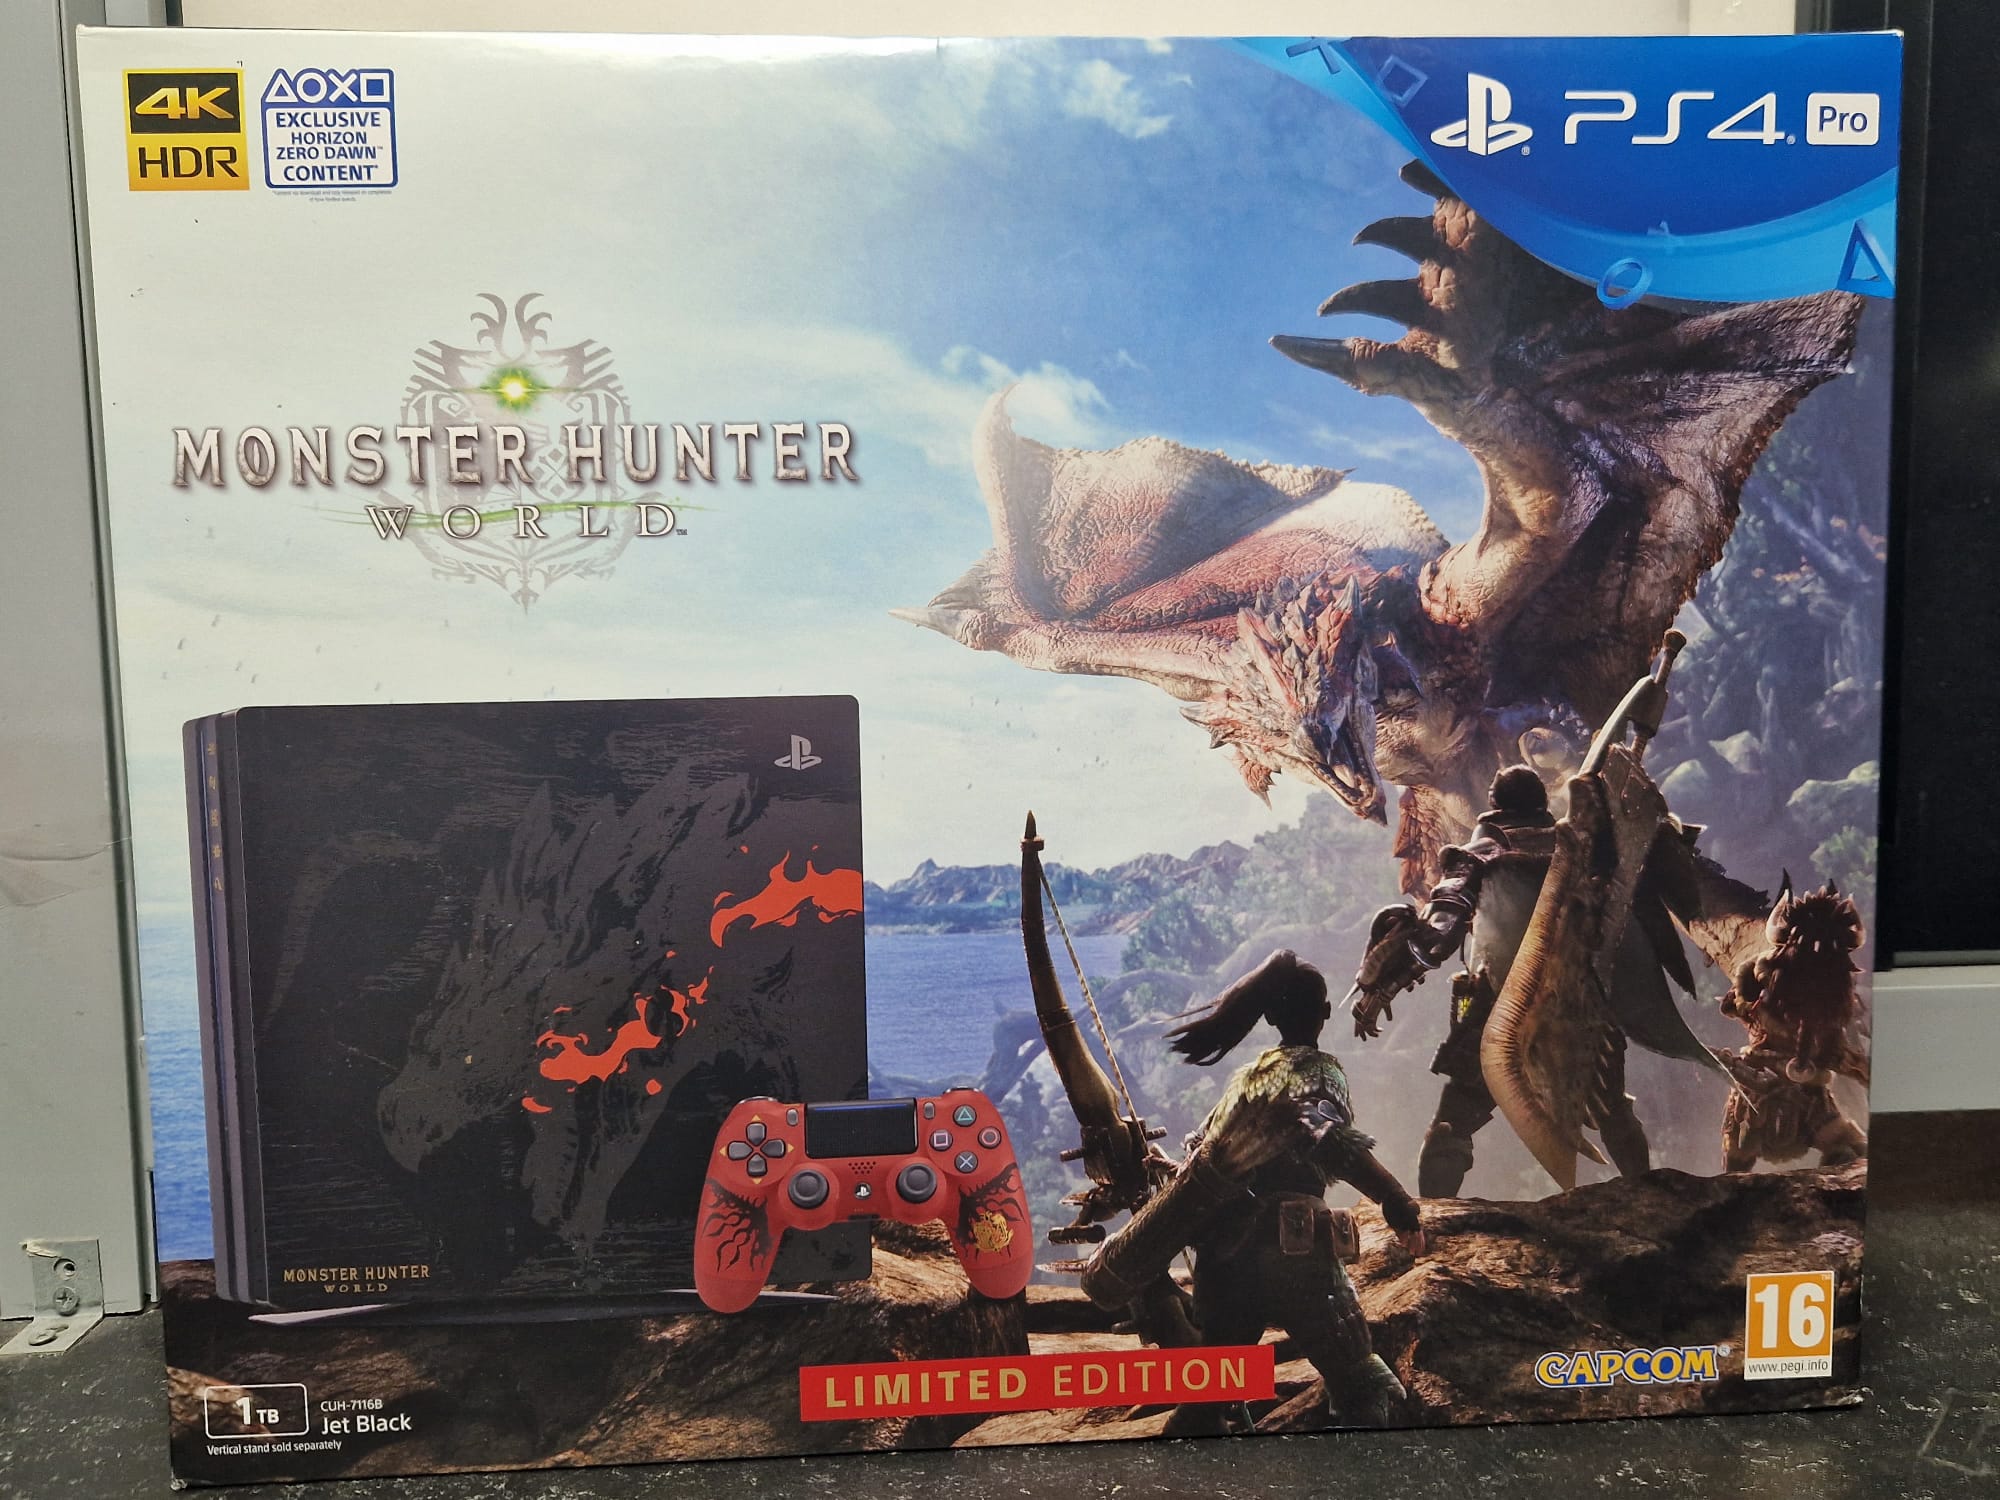 Monster Hunter World Limited Edition PlayStation 4 Pro Console 1TB